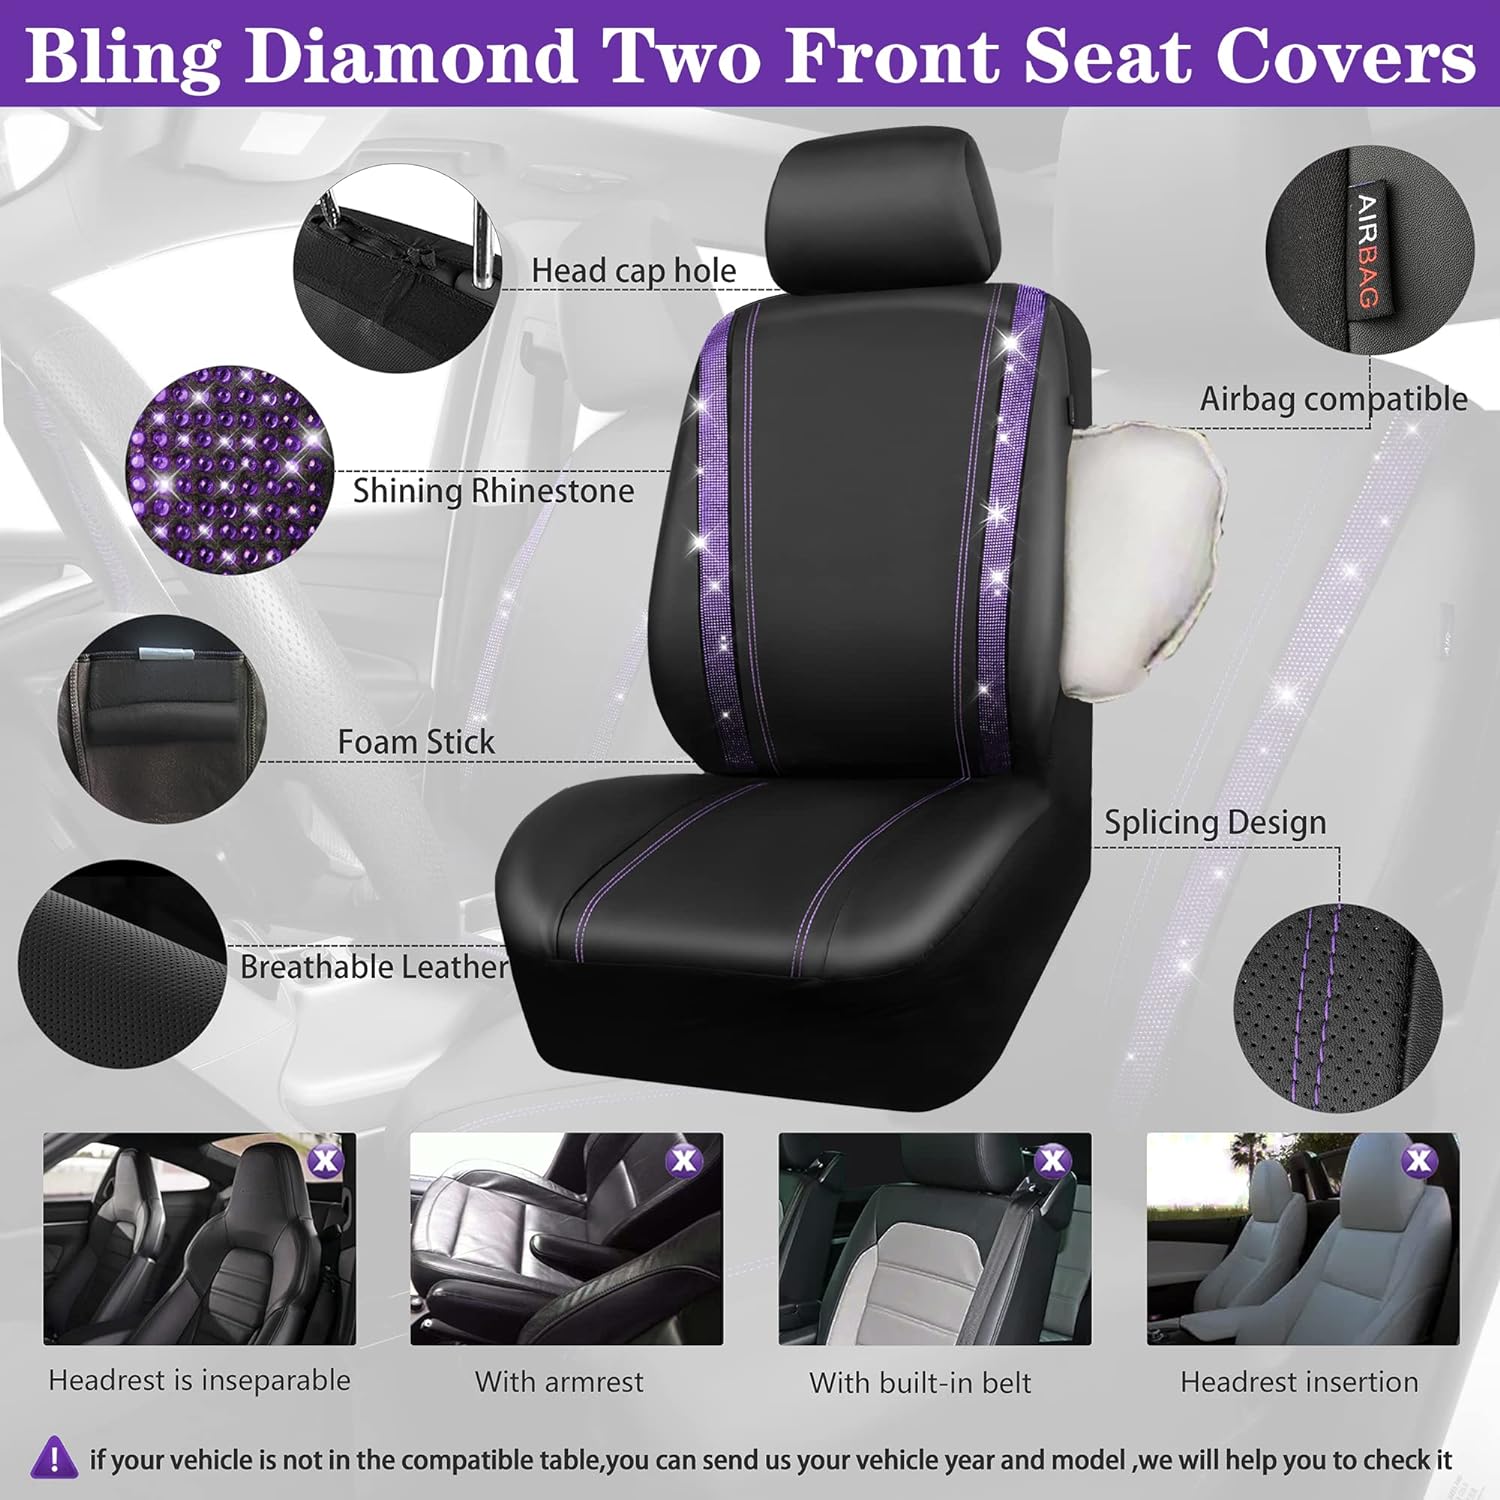 CAR PASS® Rhinestone Bling Car Seat Covers Leather &Shining Diamond Floor mats Carpet Waterproof Anti-Slip Nibs& Bling Accessories Interior Sets for Women Silver Glitter White Crystal Sparkly